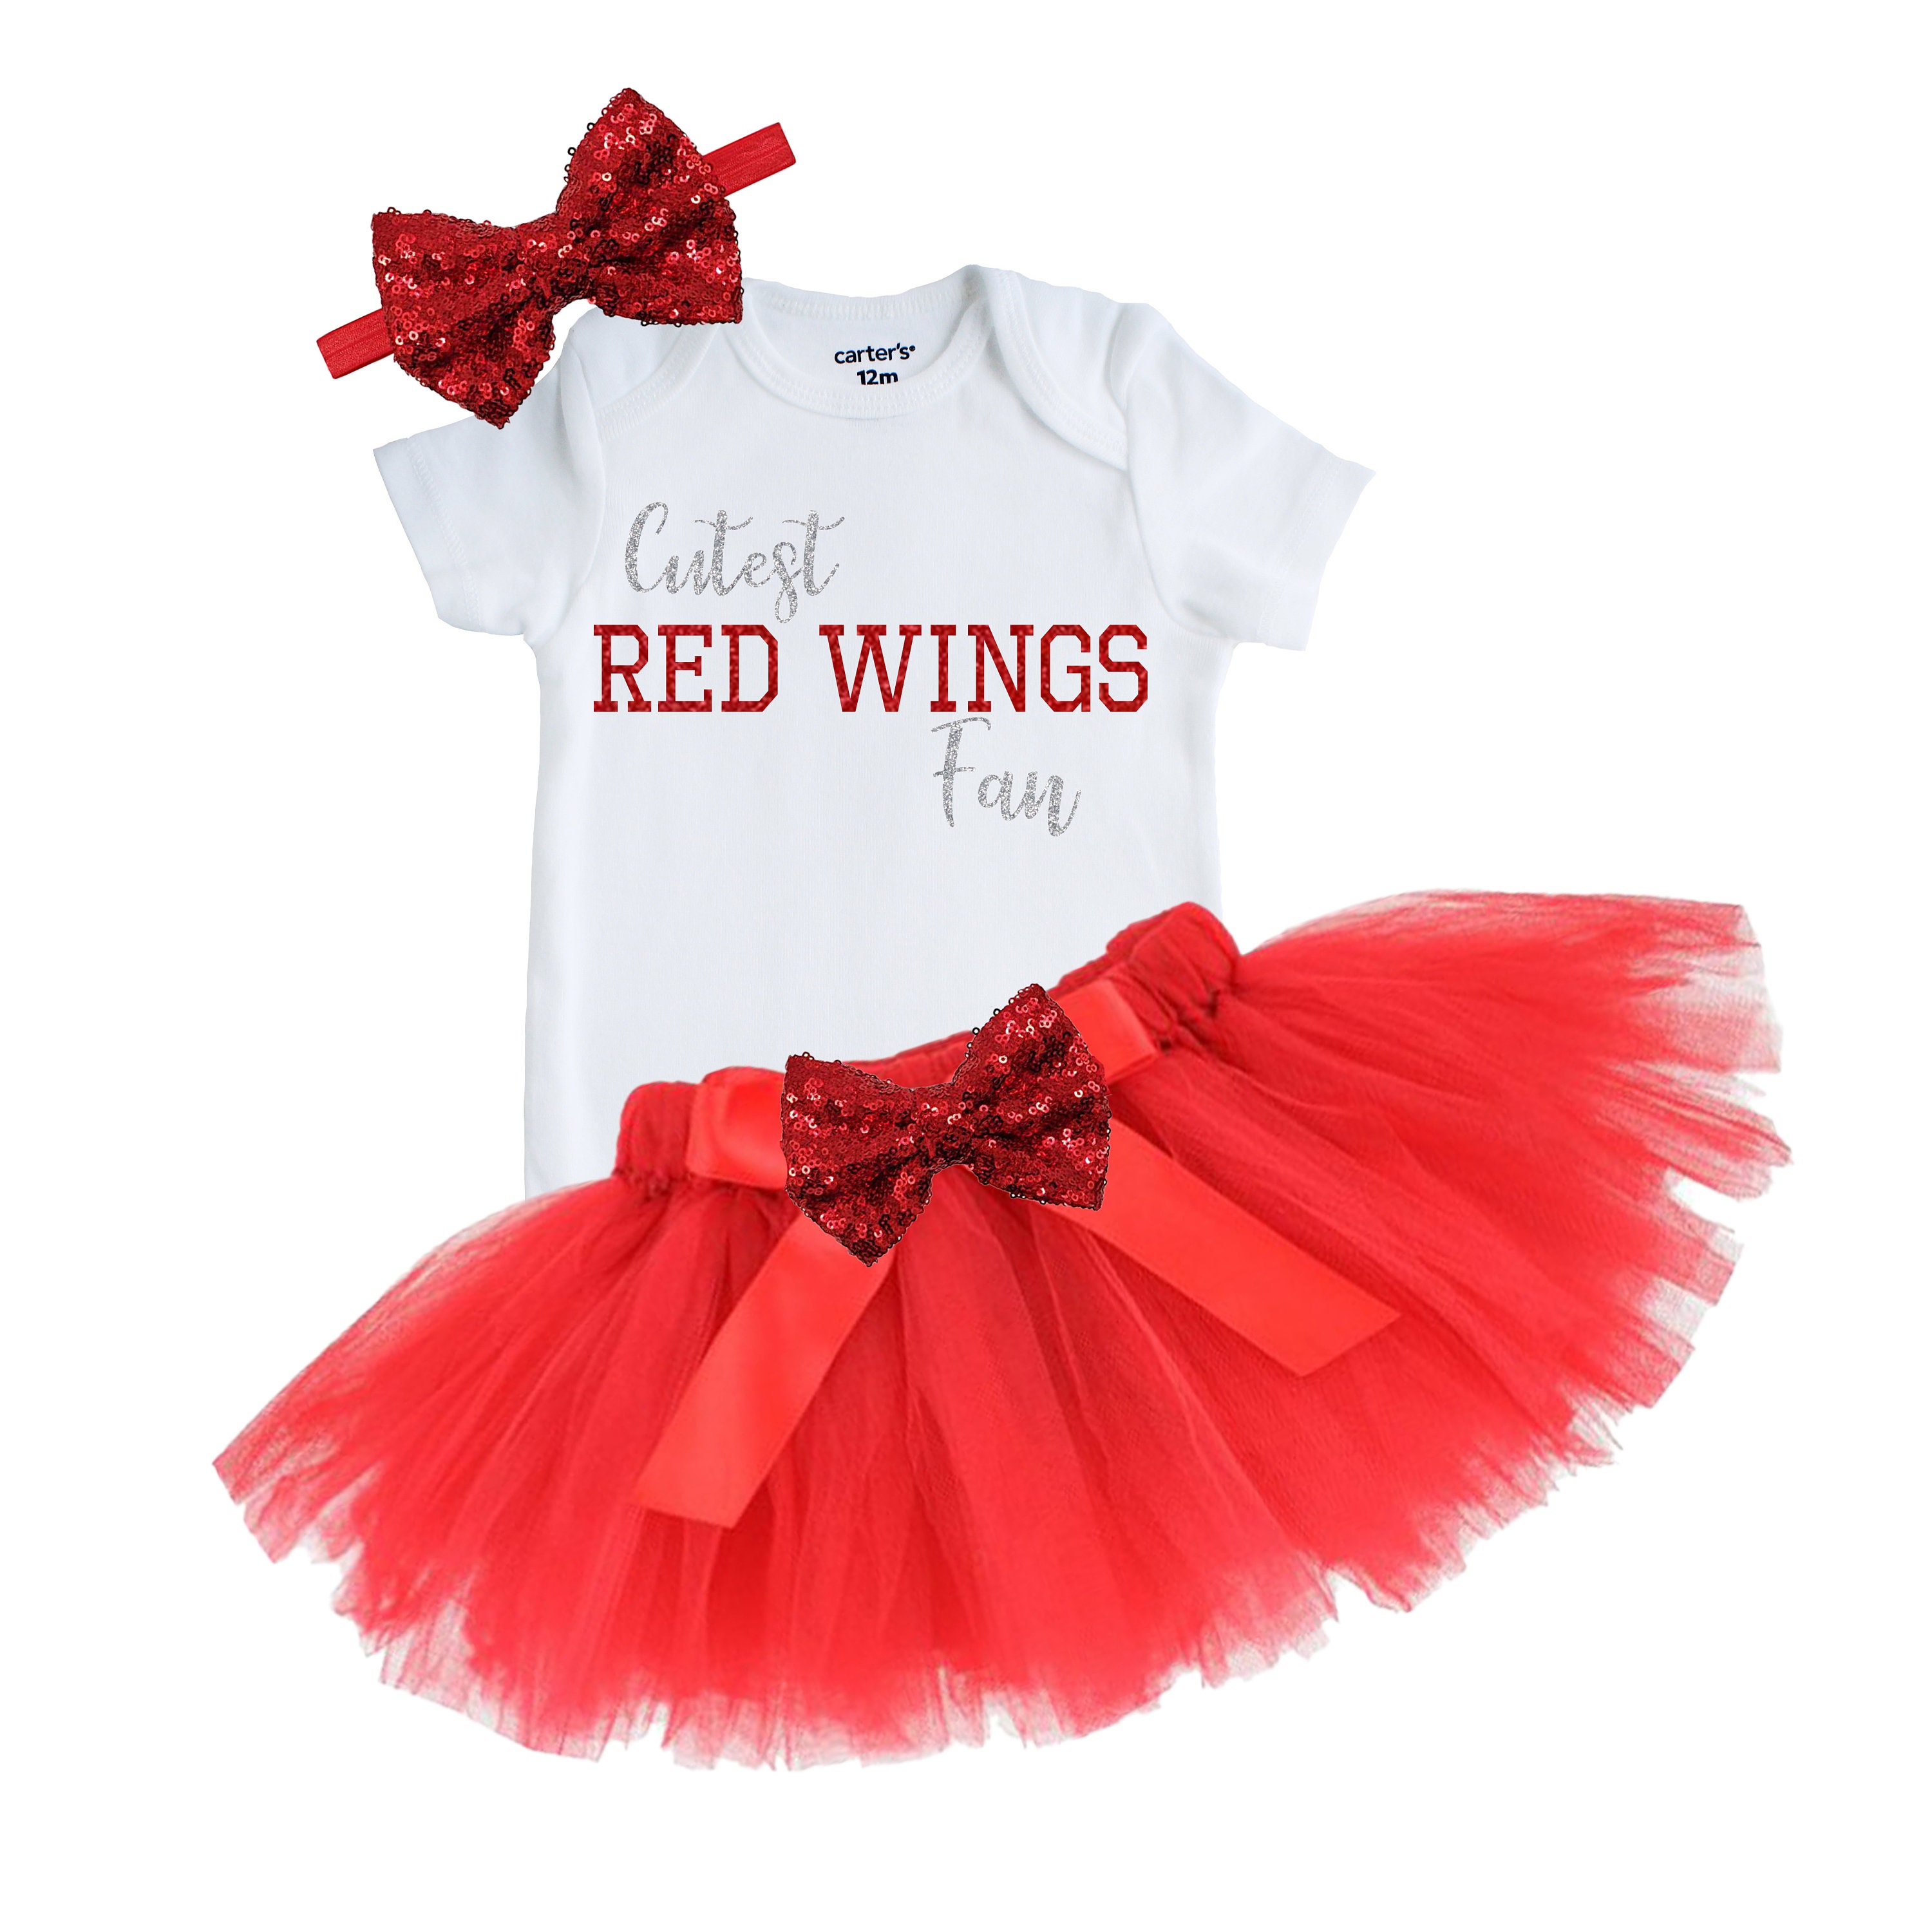 baby red wings jersey